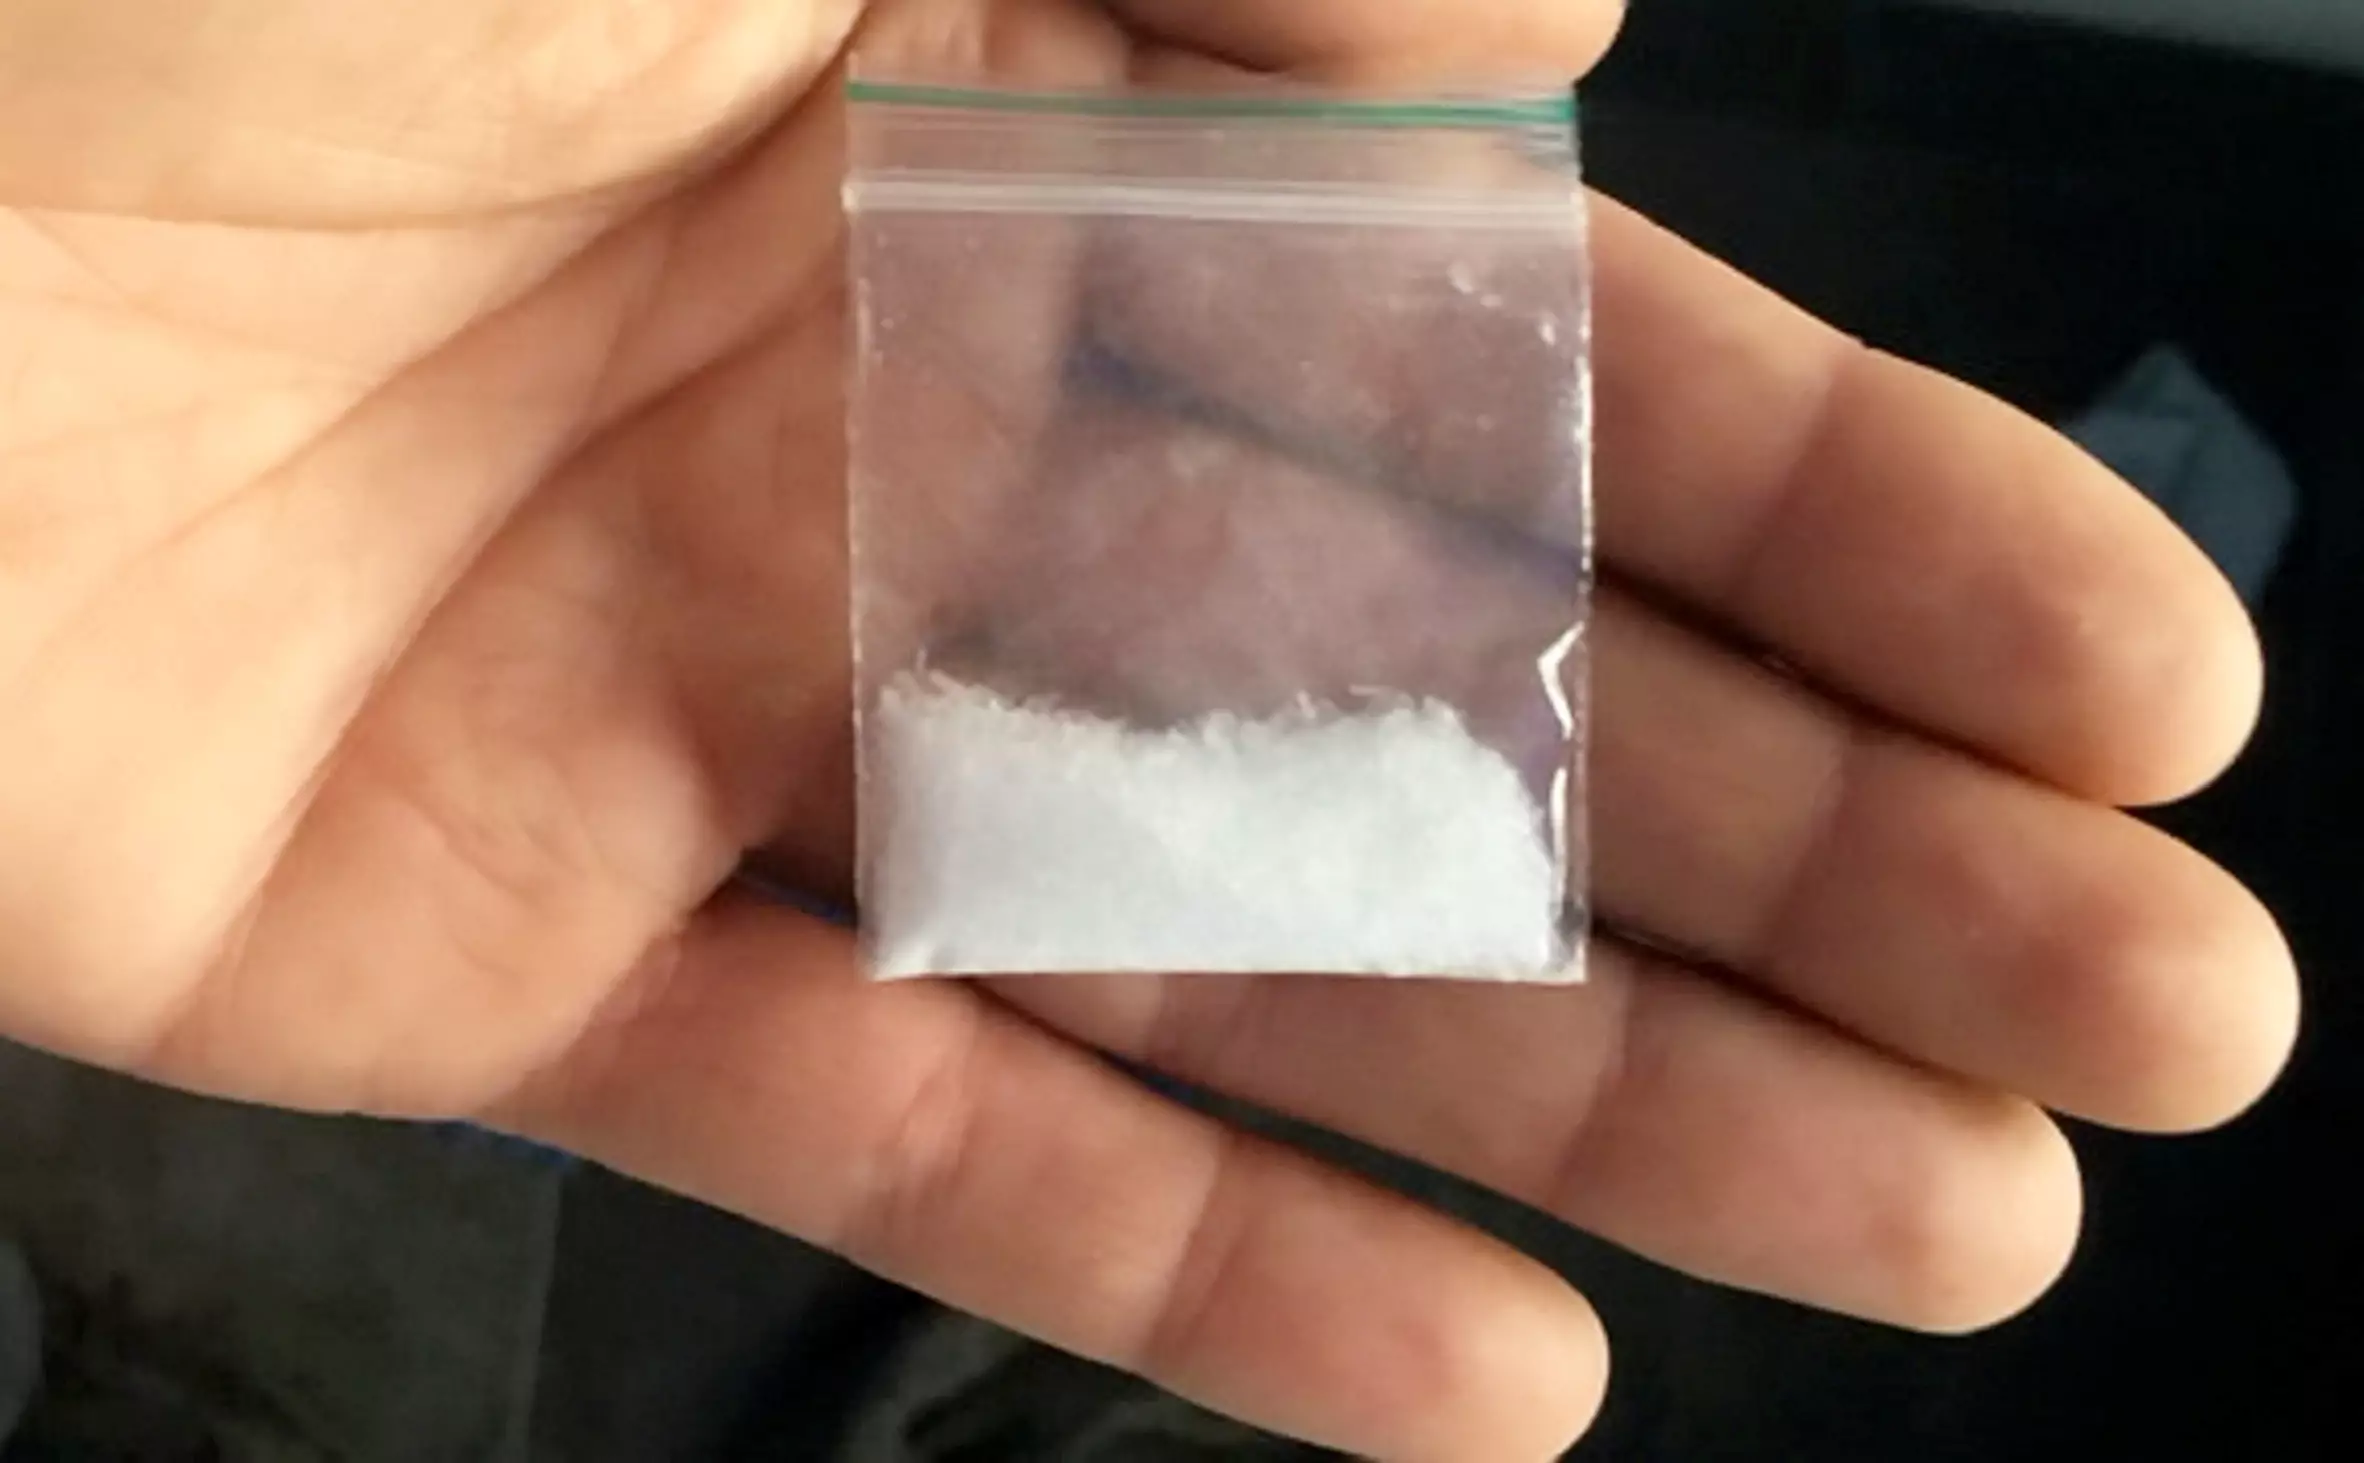 Drugs found in car